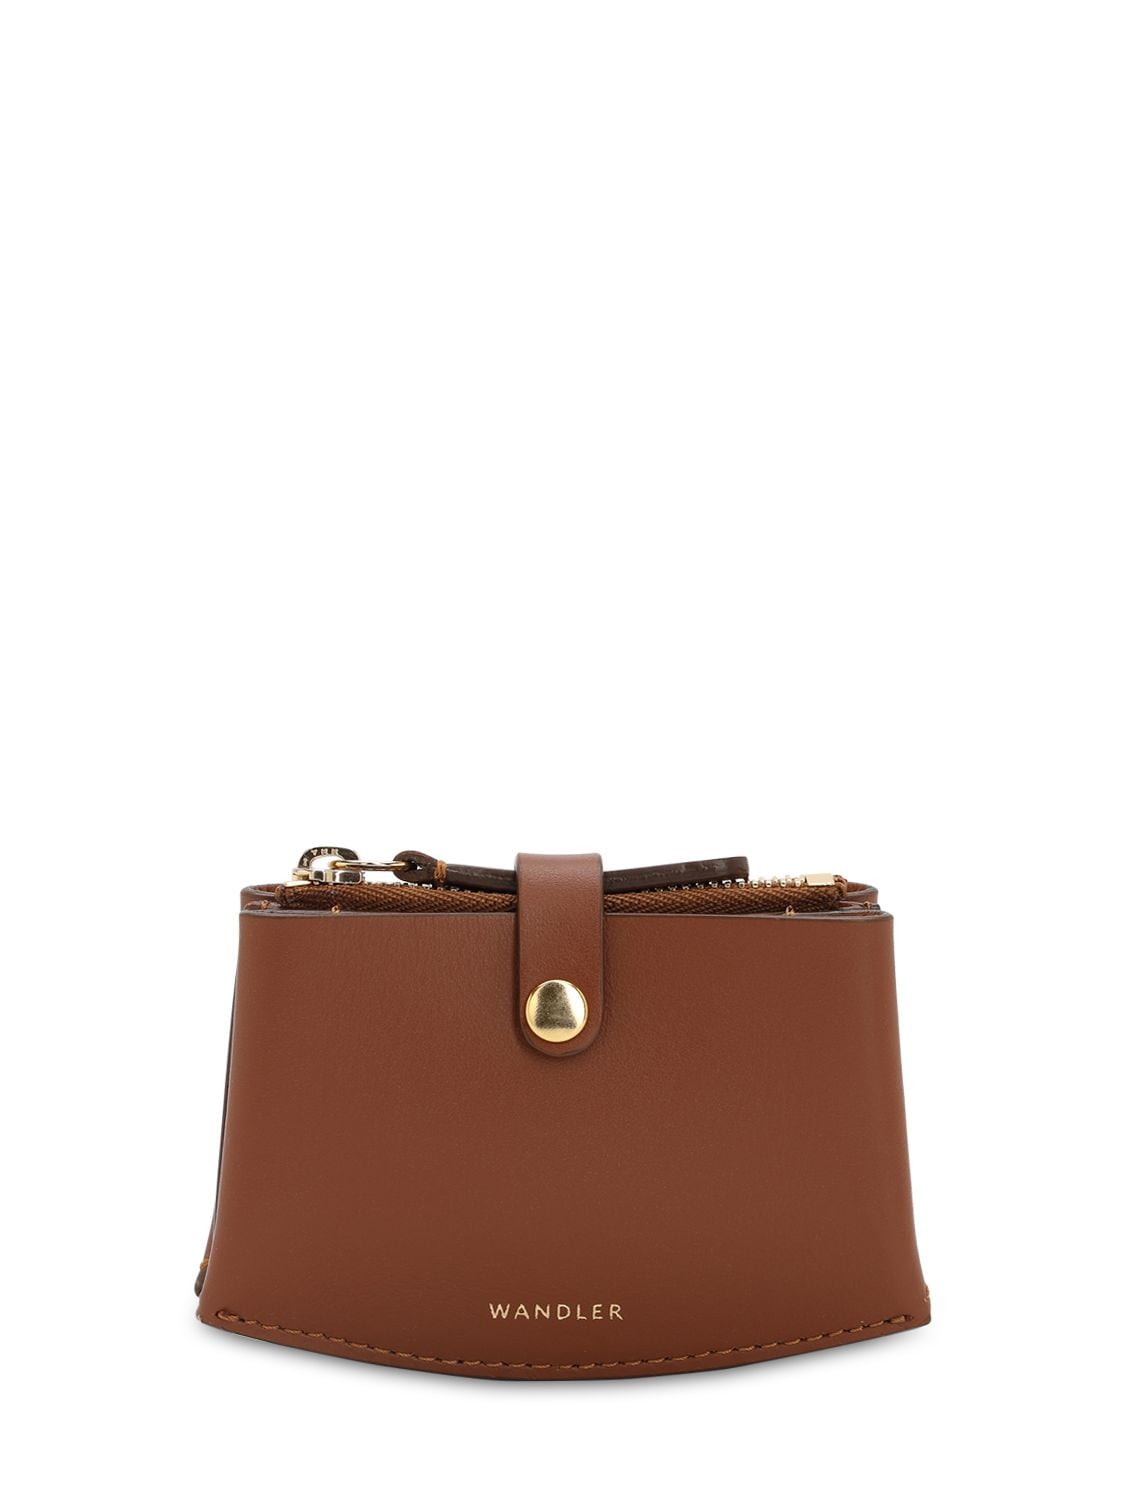 Wandler Corsa Smooth Leather Card Case In Tan